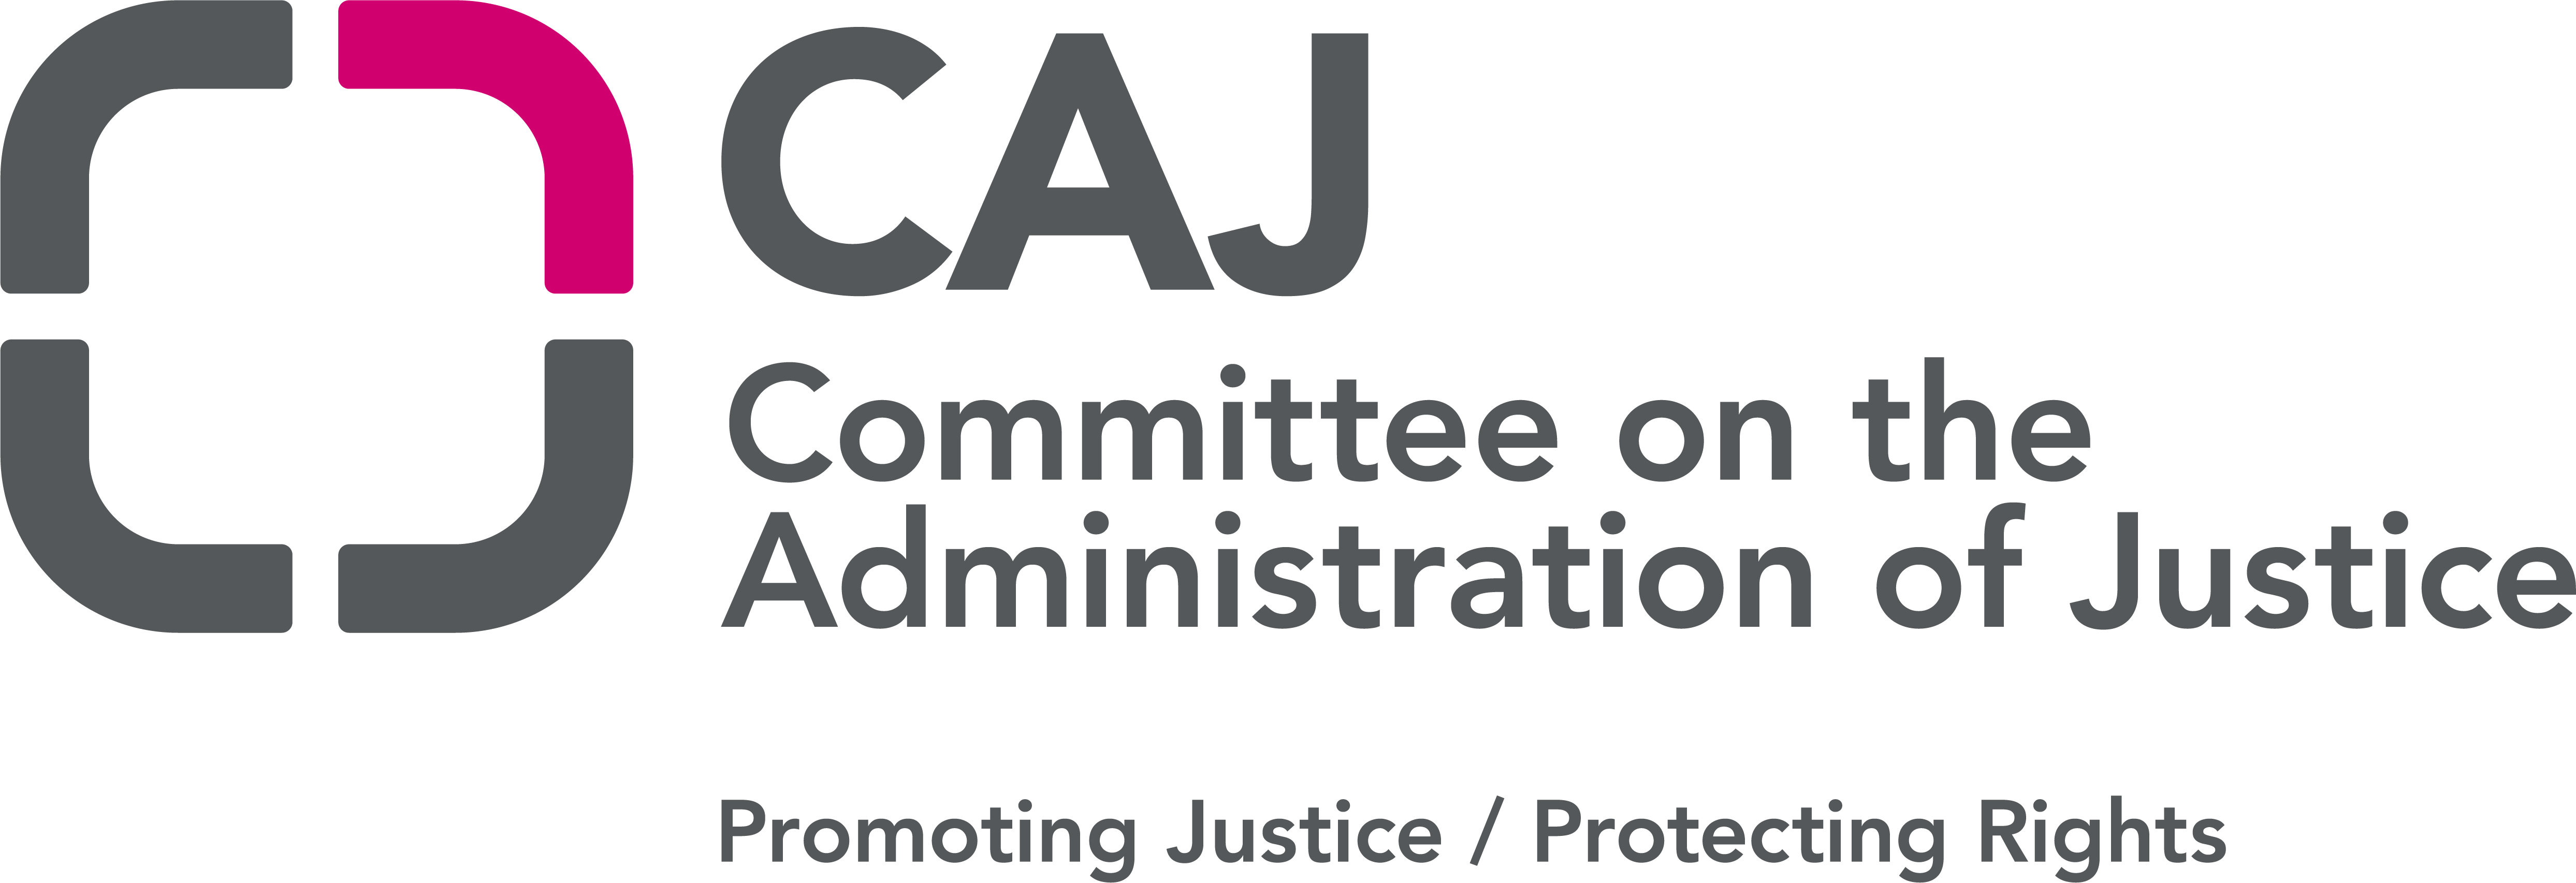 logo for Committee on the Administration of Justice (CAJ)